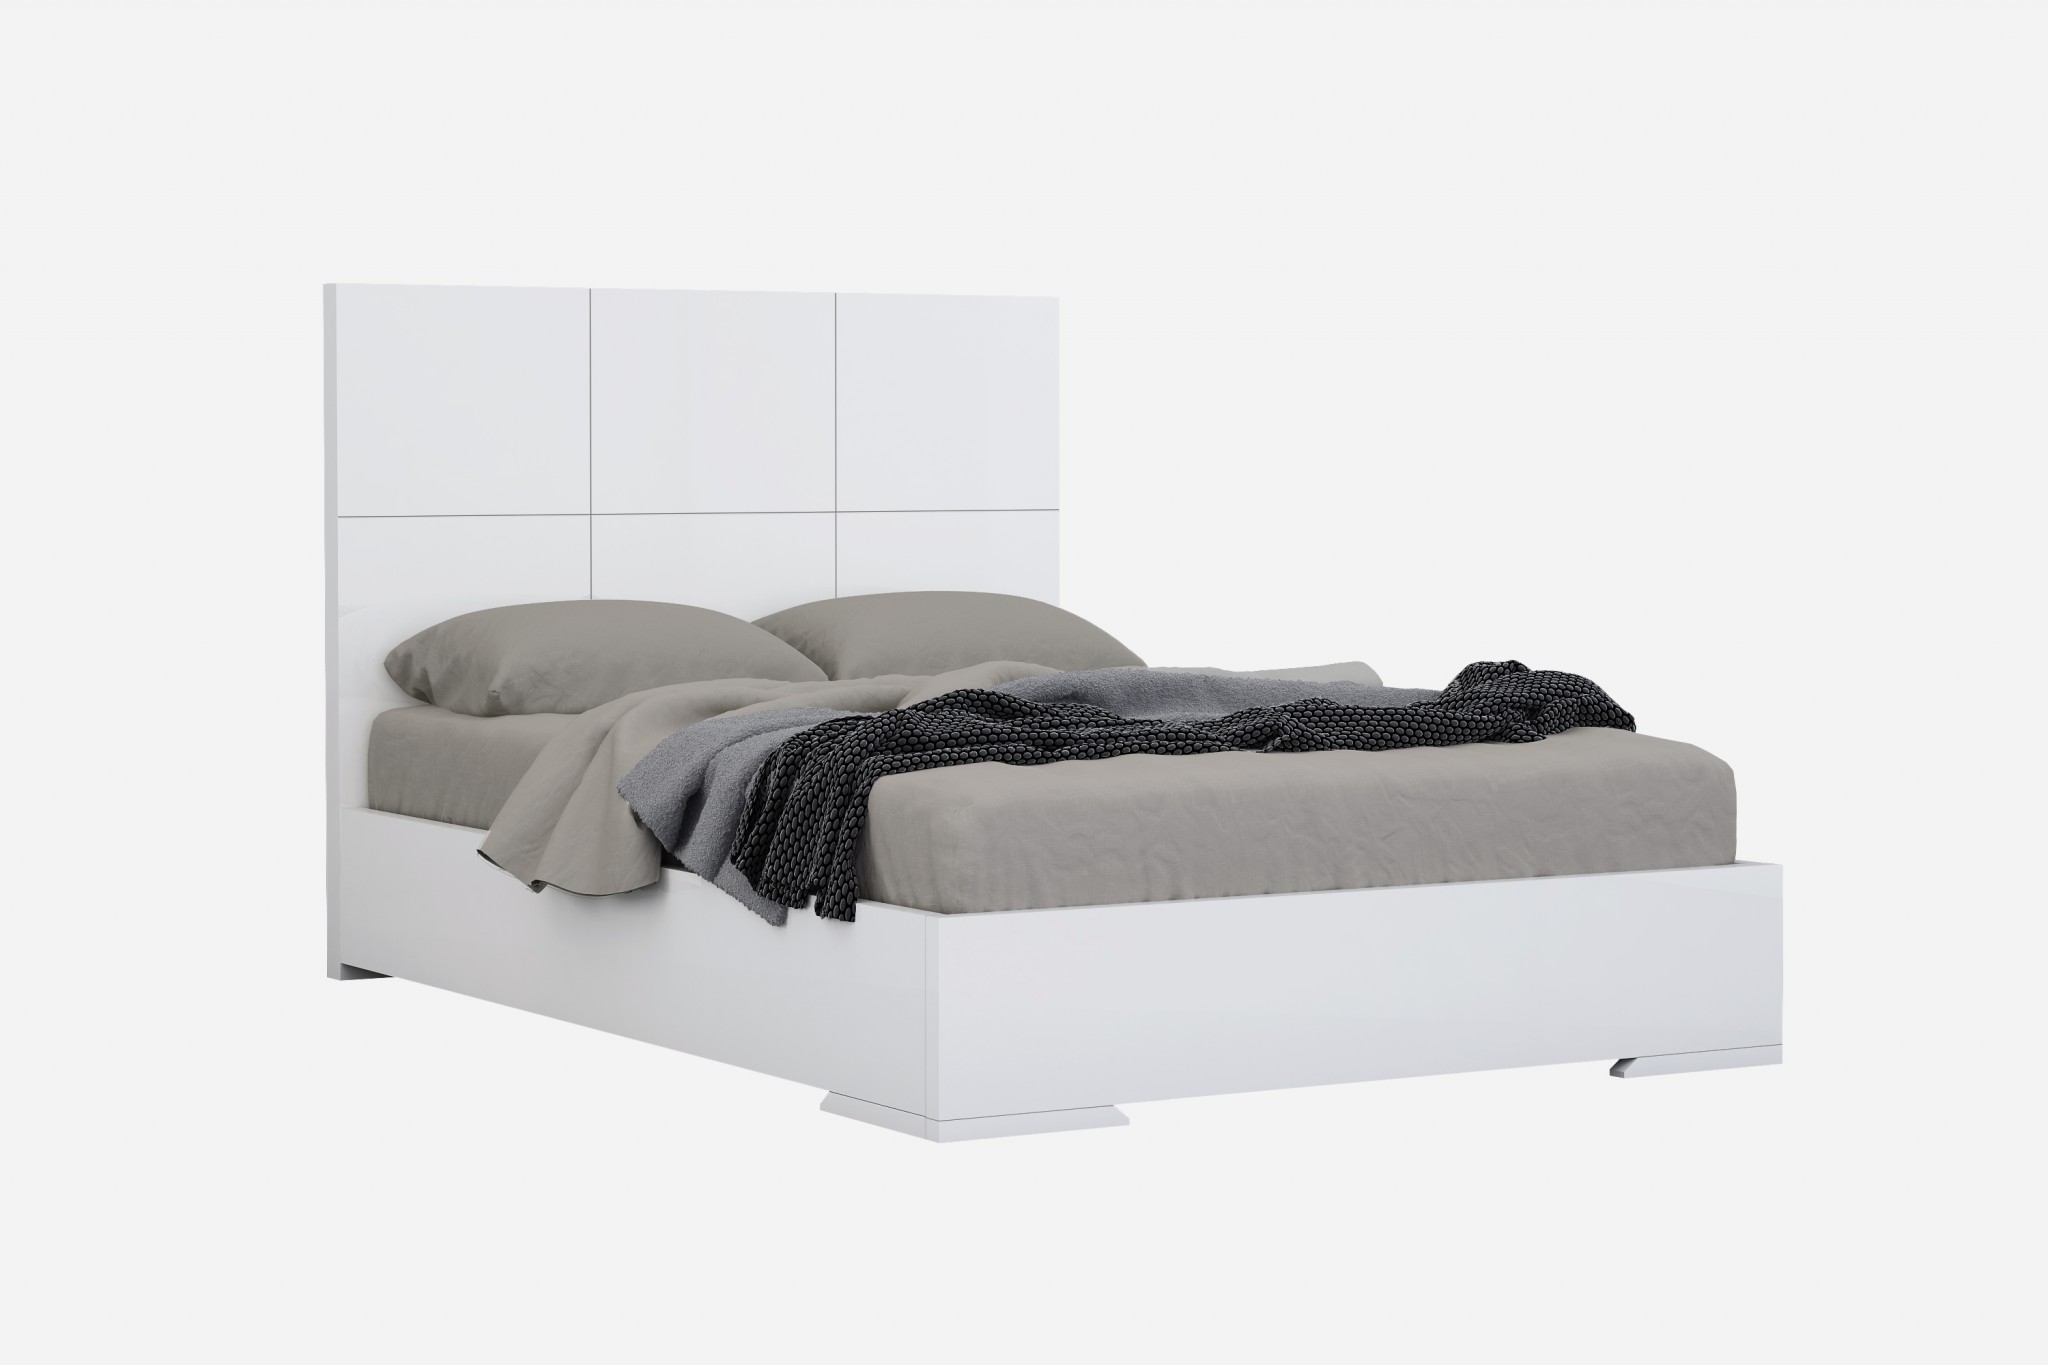 57" X 79" X 48" White Stainless Steel King Bed